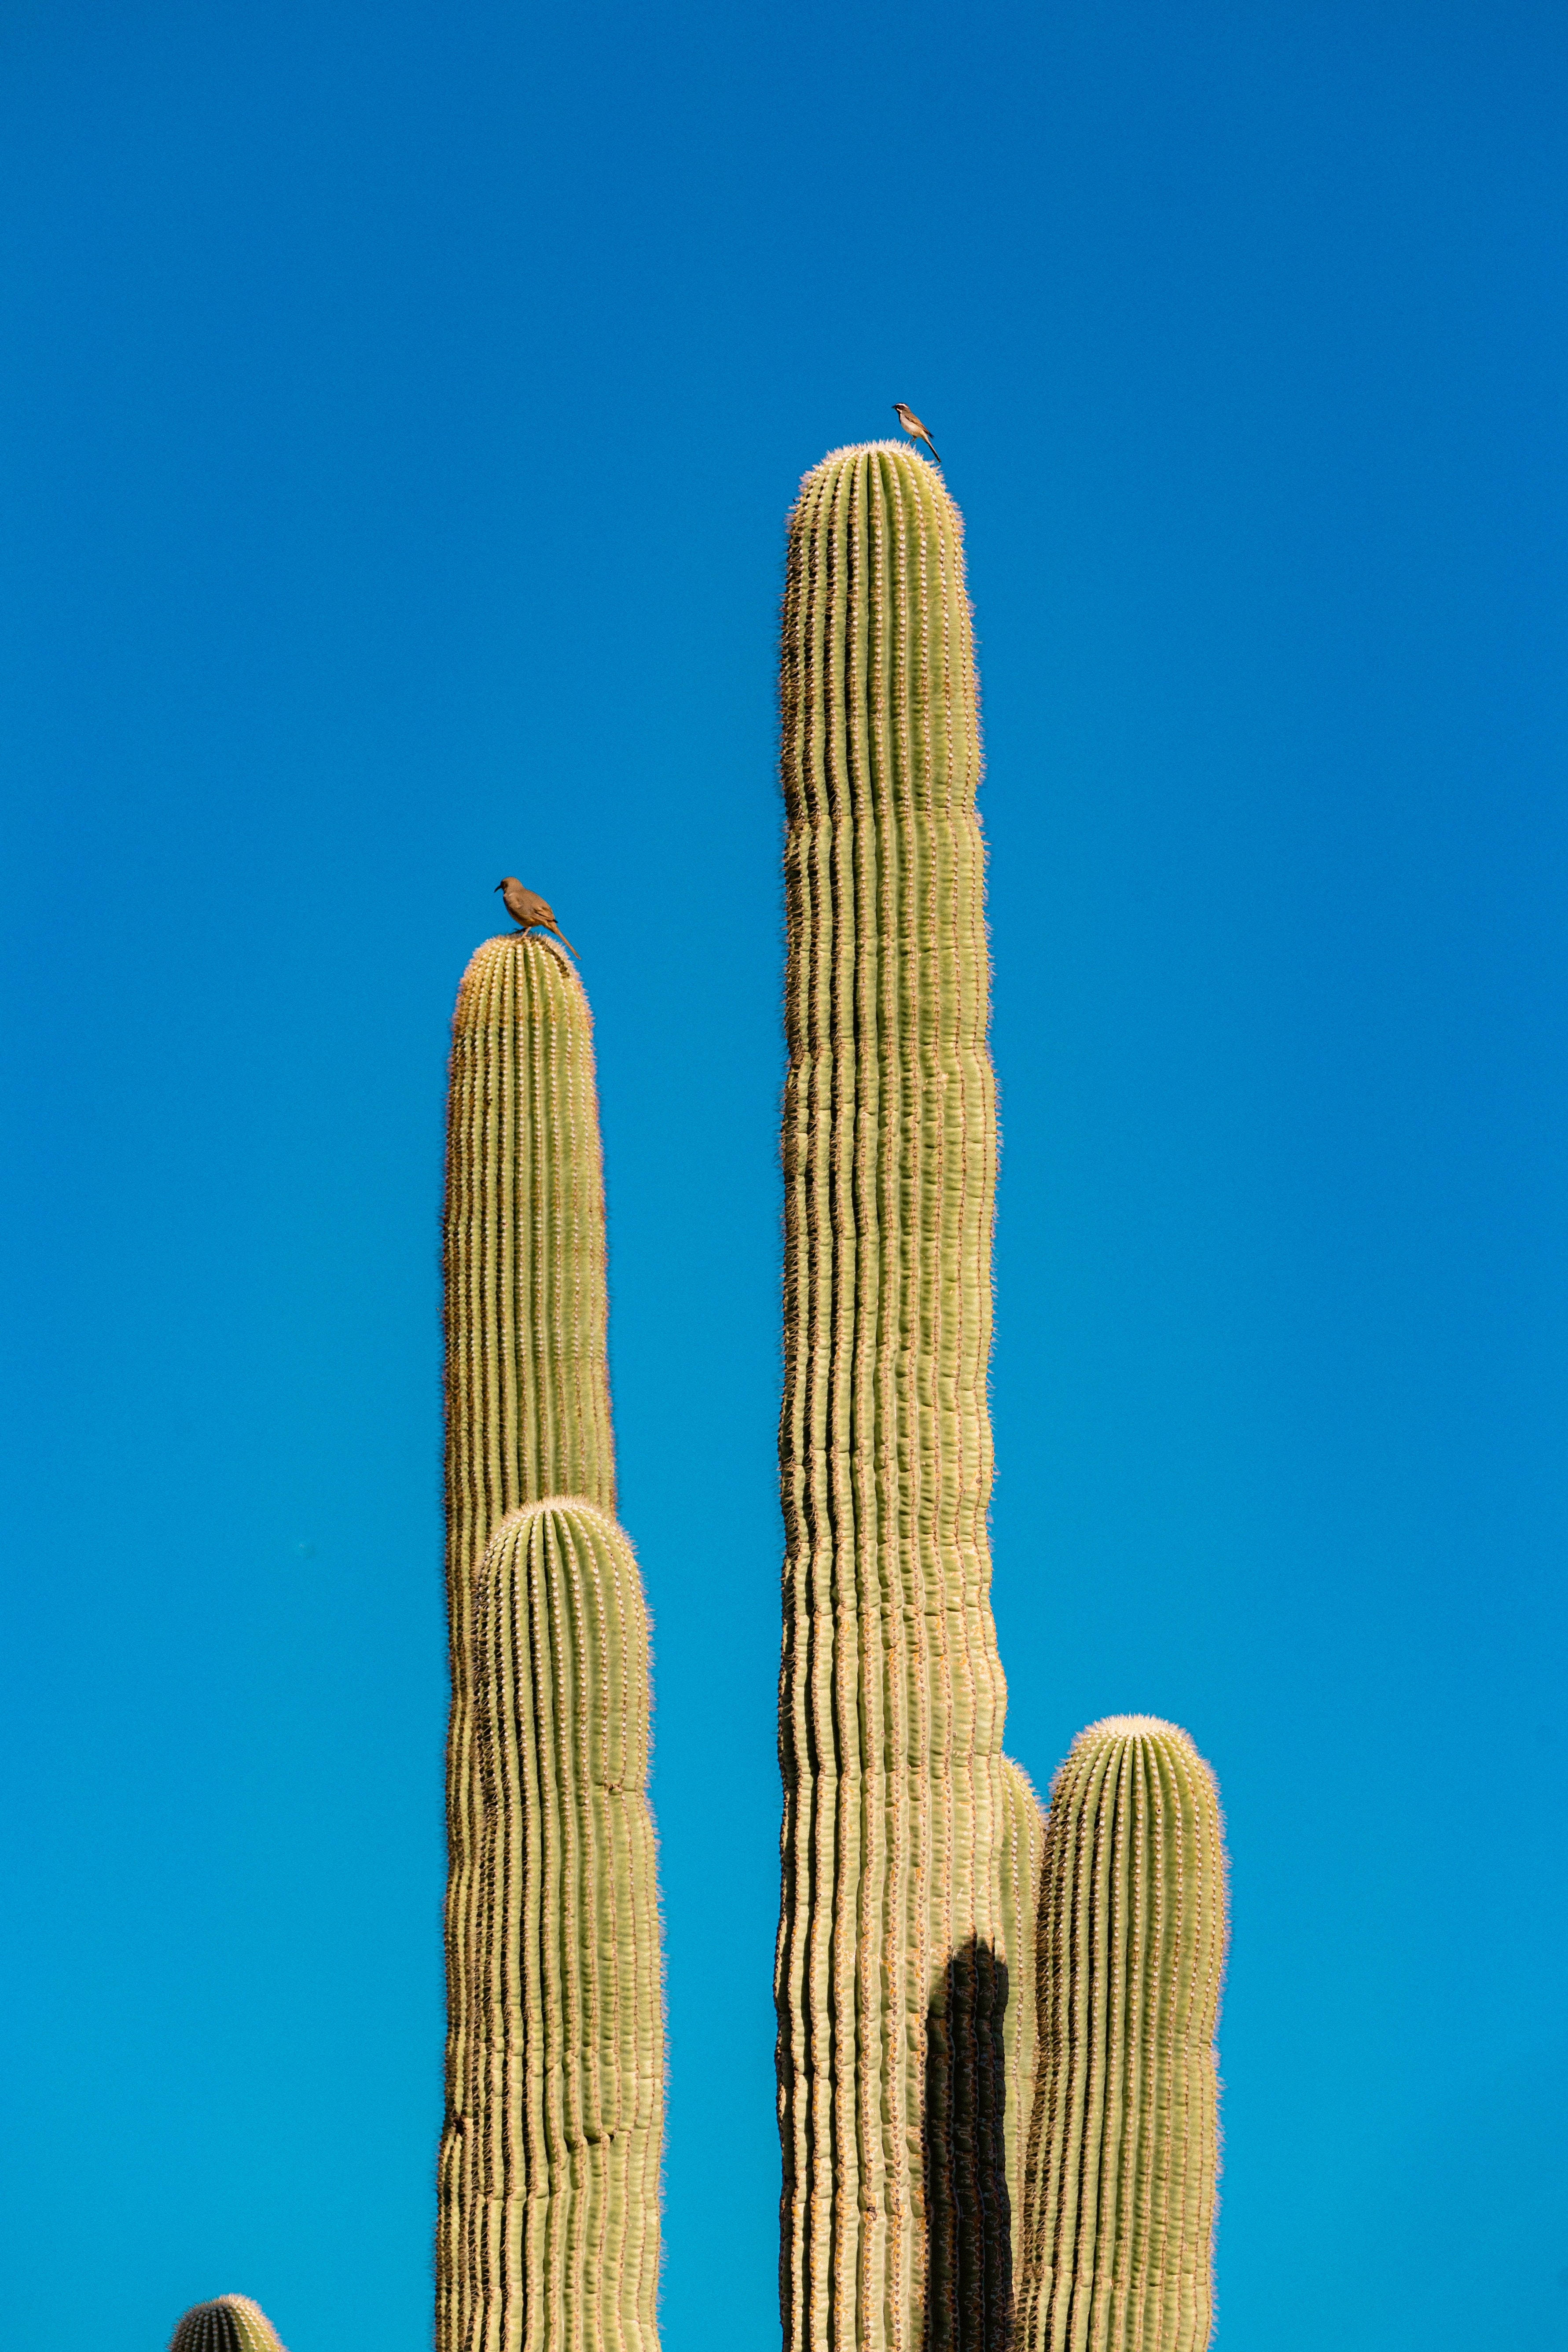 A cactus with two birds on top of it - Cactus